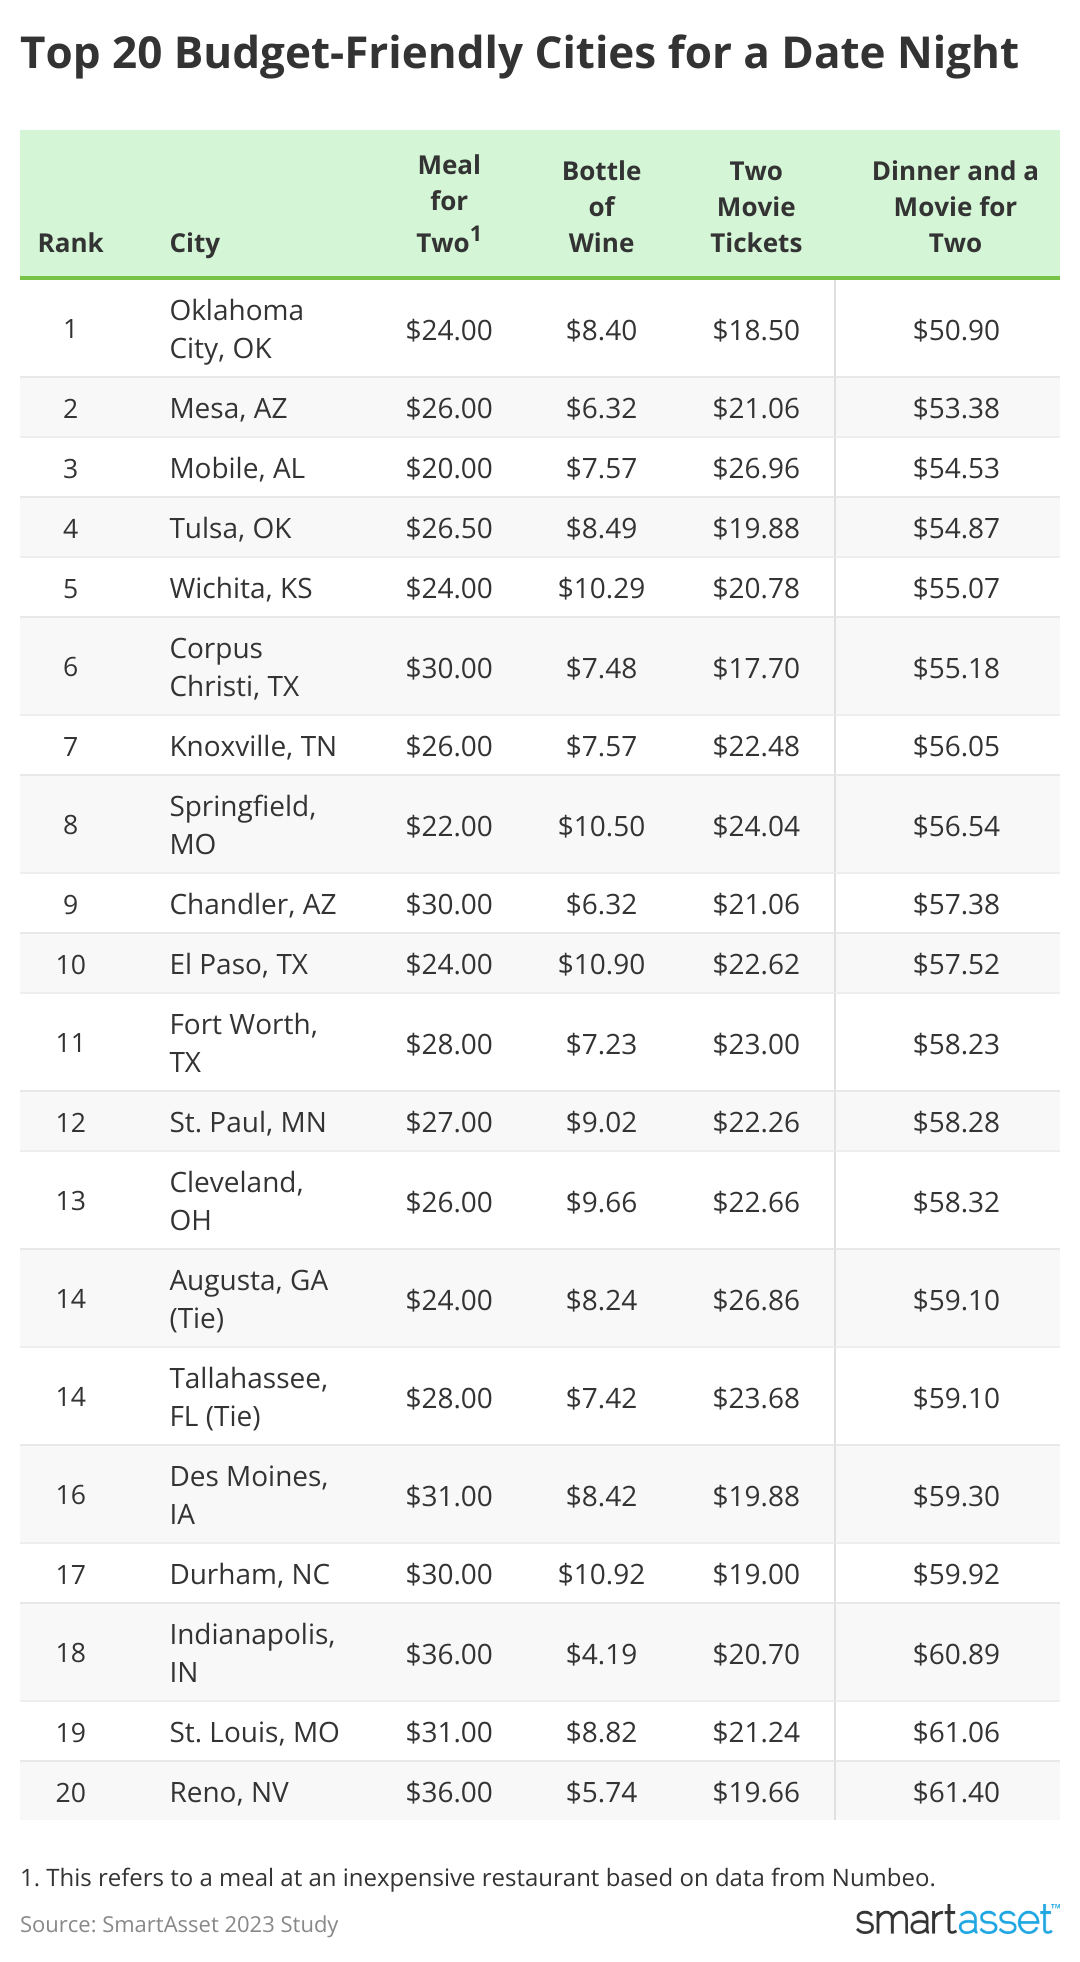 Table showing top 20 budget-friendly cities for a date night.